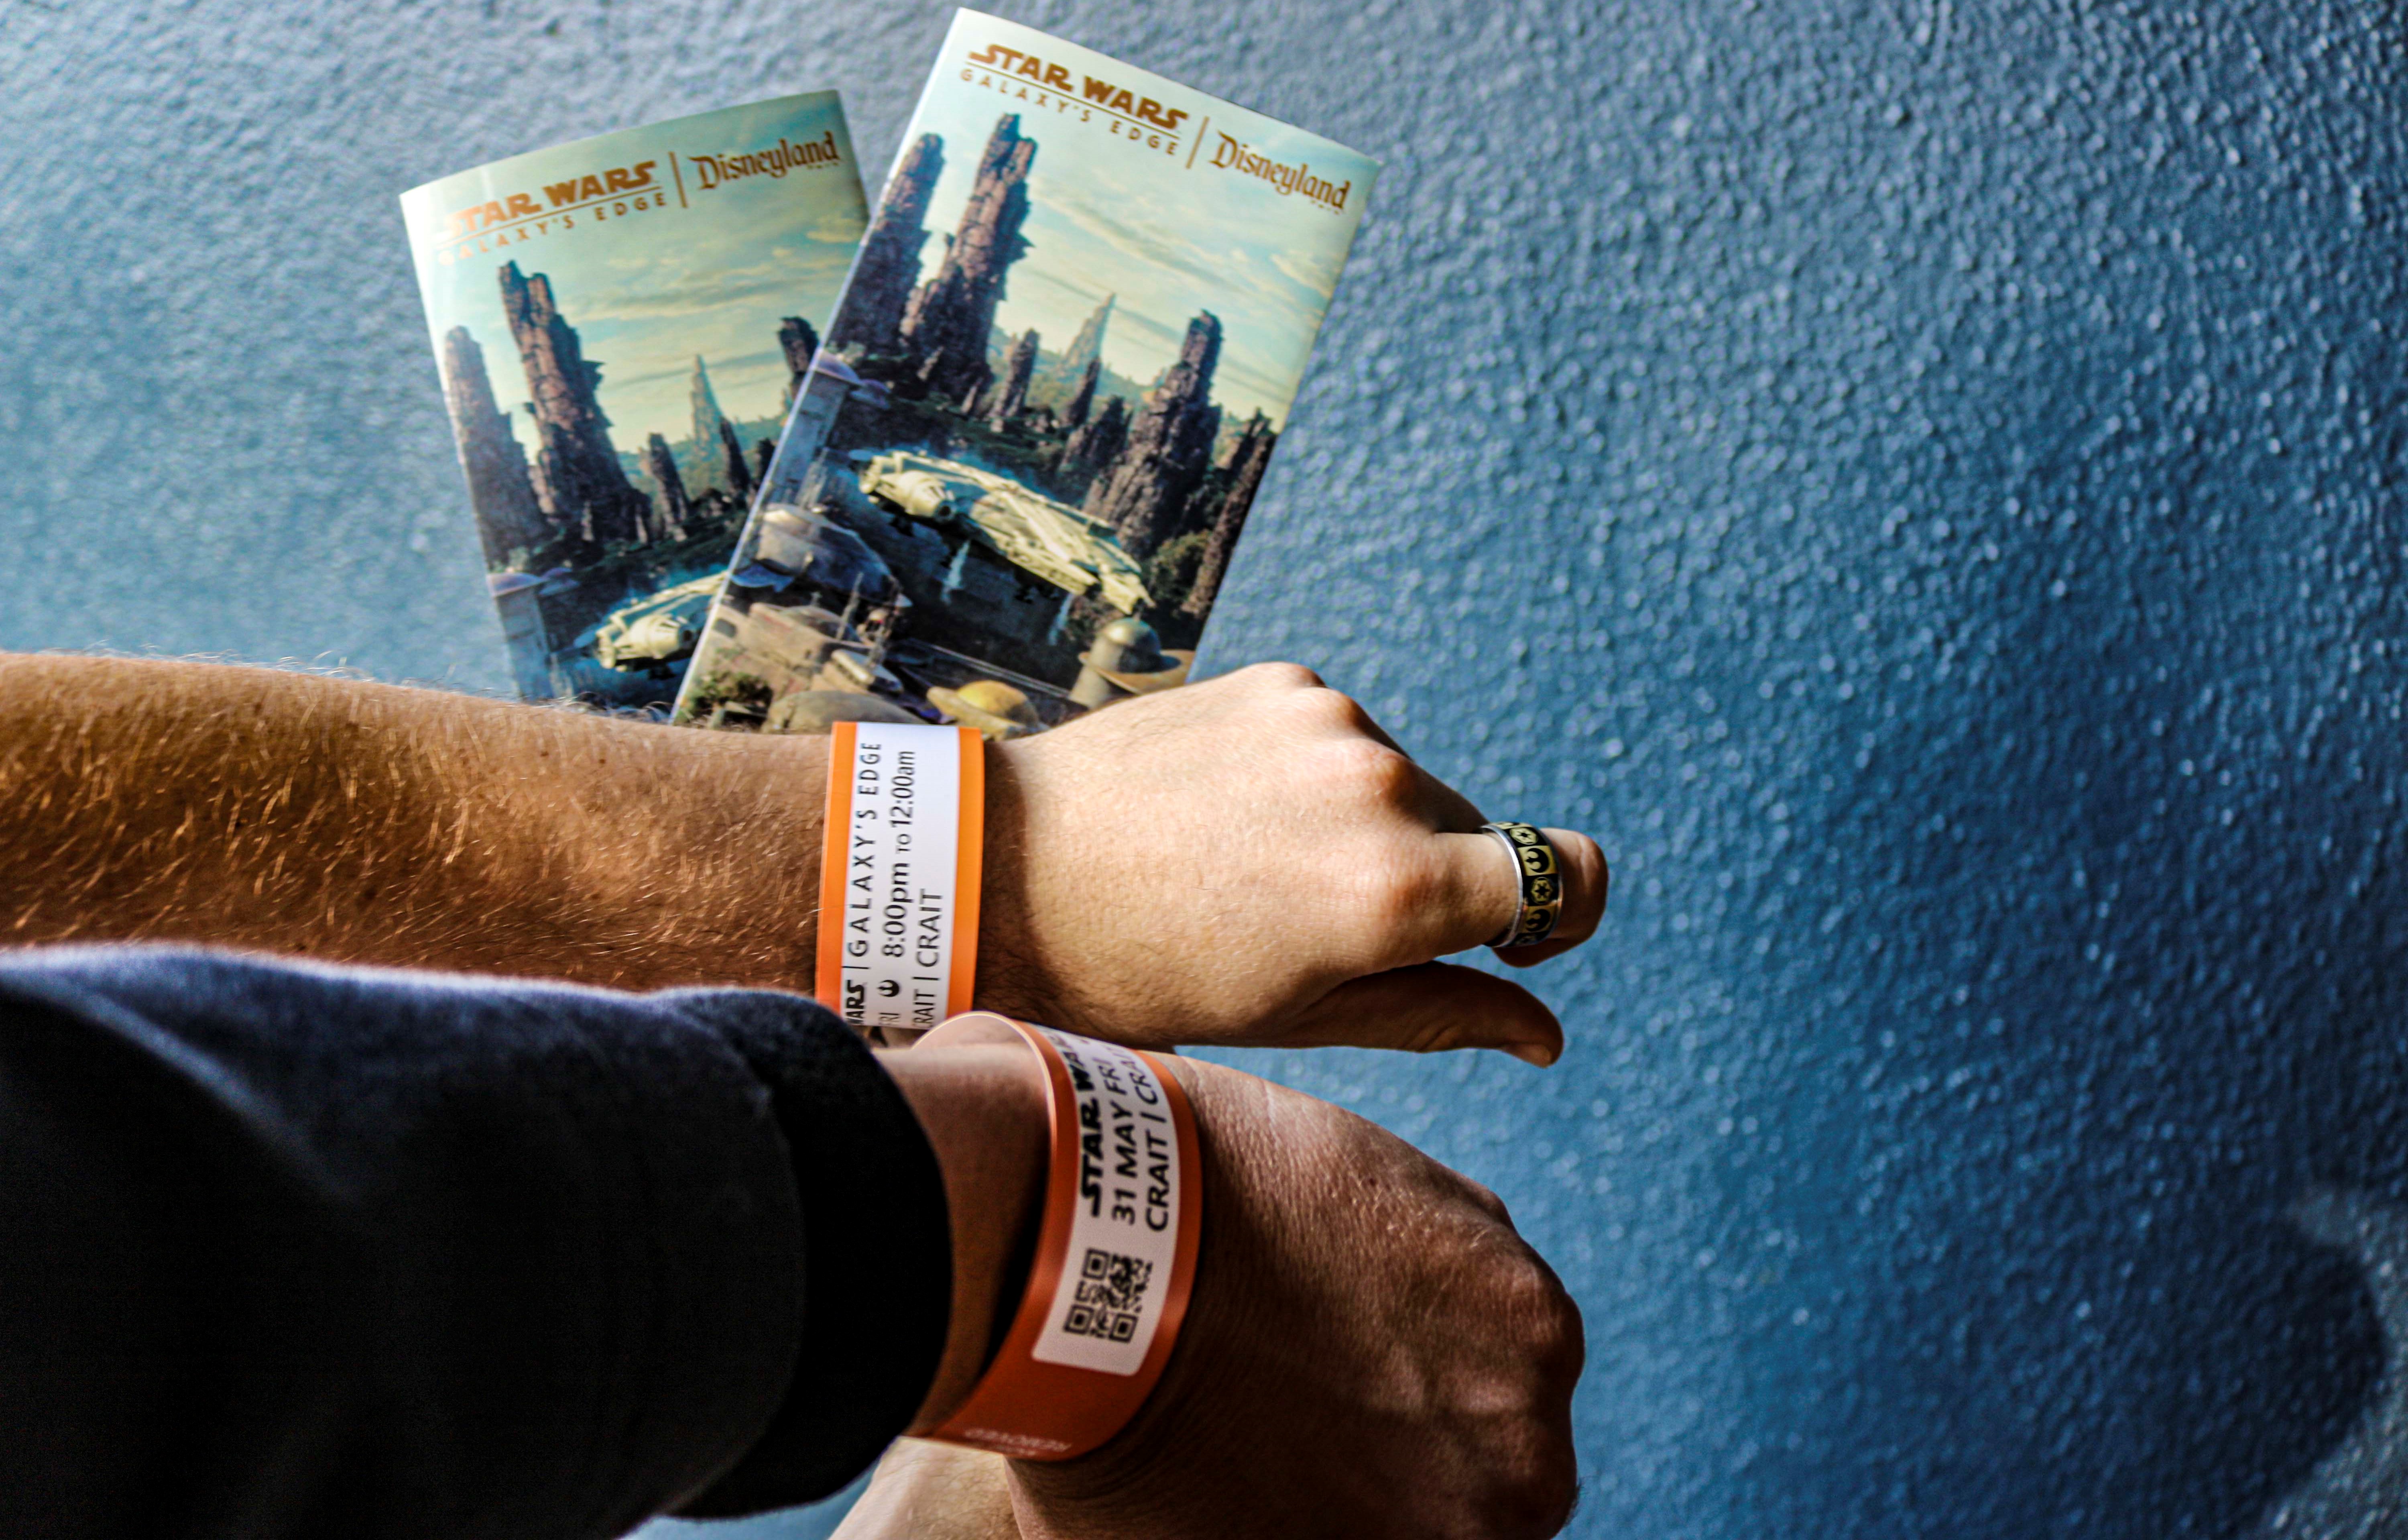 Wristbands will be scanned after you check in to prepare you for your journey! 